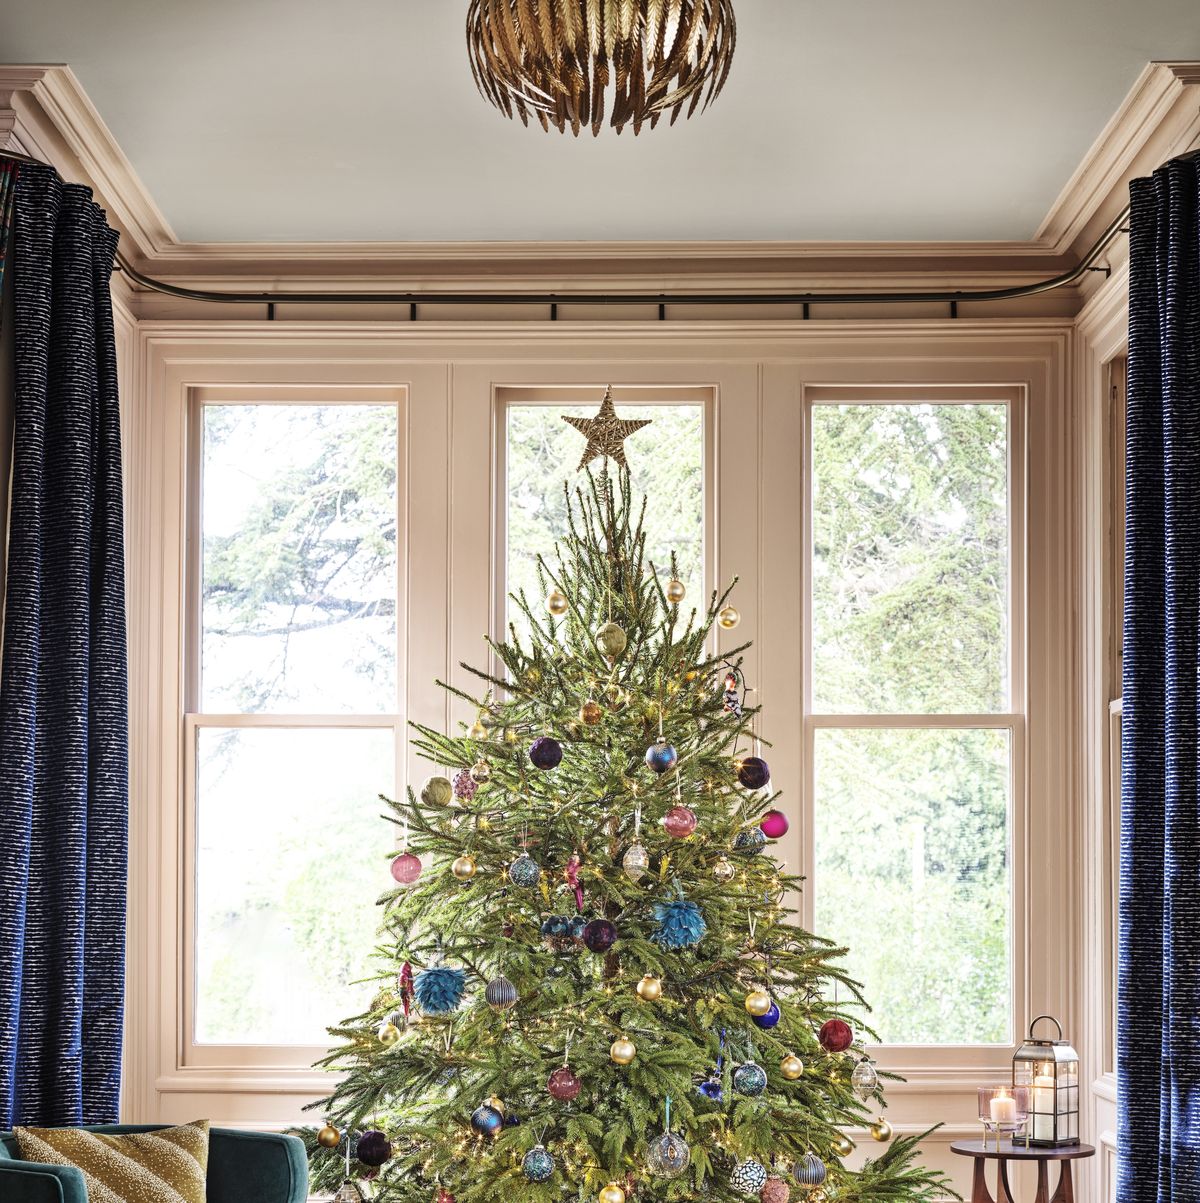 How to Store Christmas Decorations (Our 25 Best Tips)